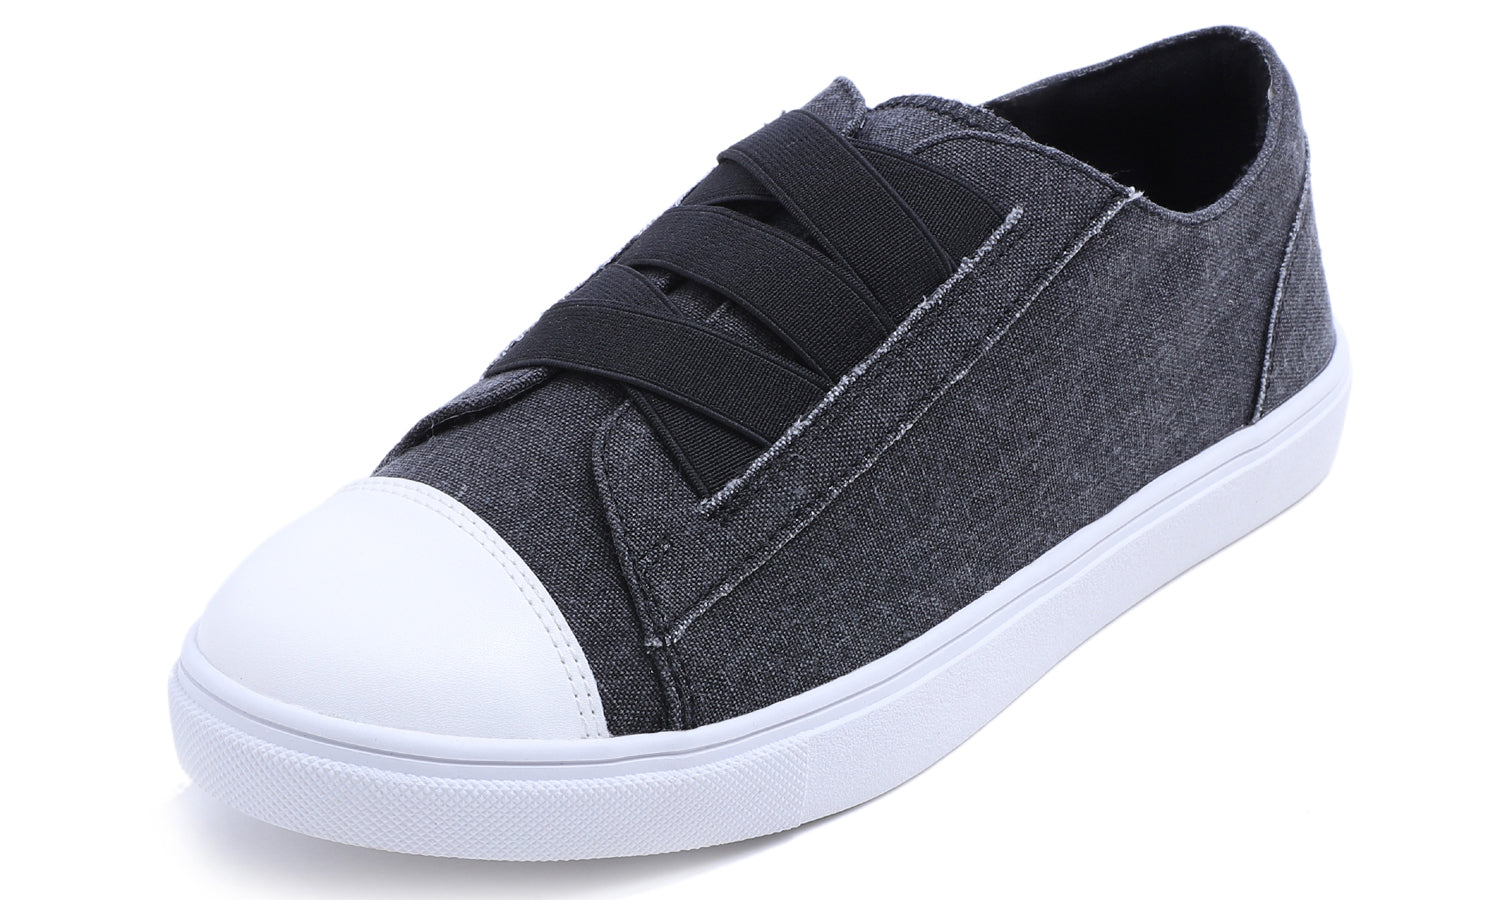 Feversole Women's Casual Slip On Sneaker Comfort Cupsole Loafer Flats Fashion Canvas Easy Elastic Low Top Black